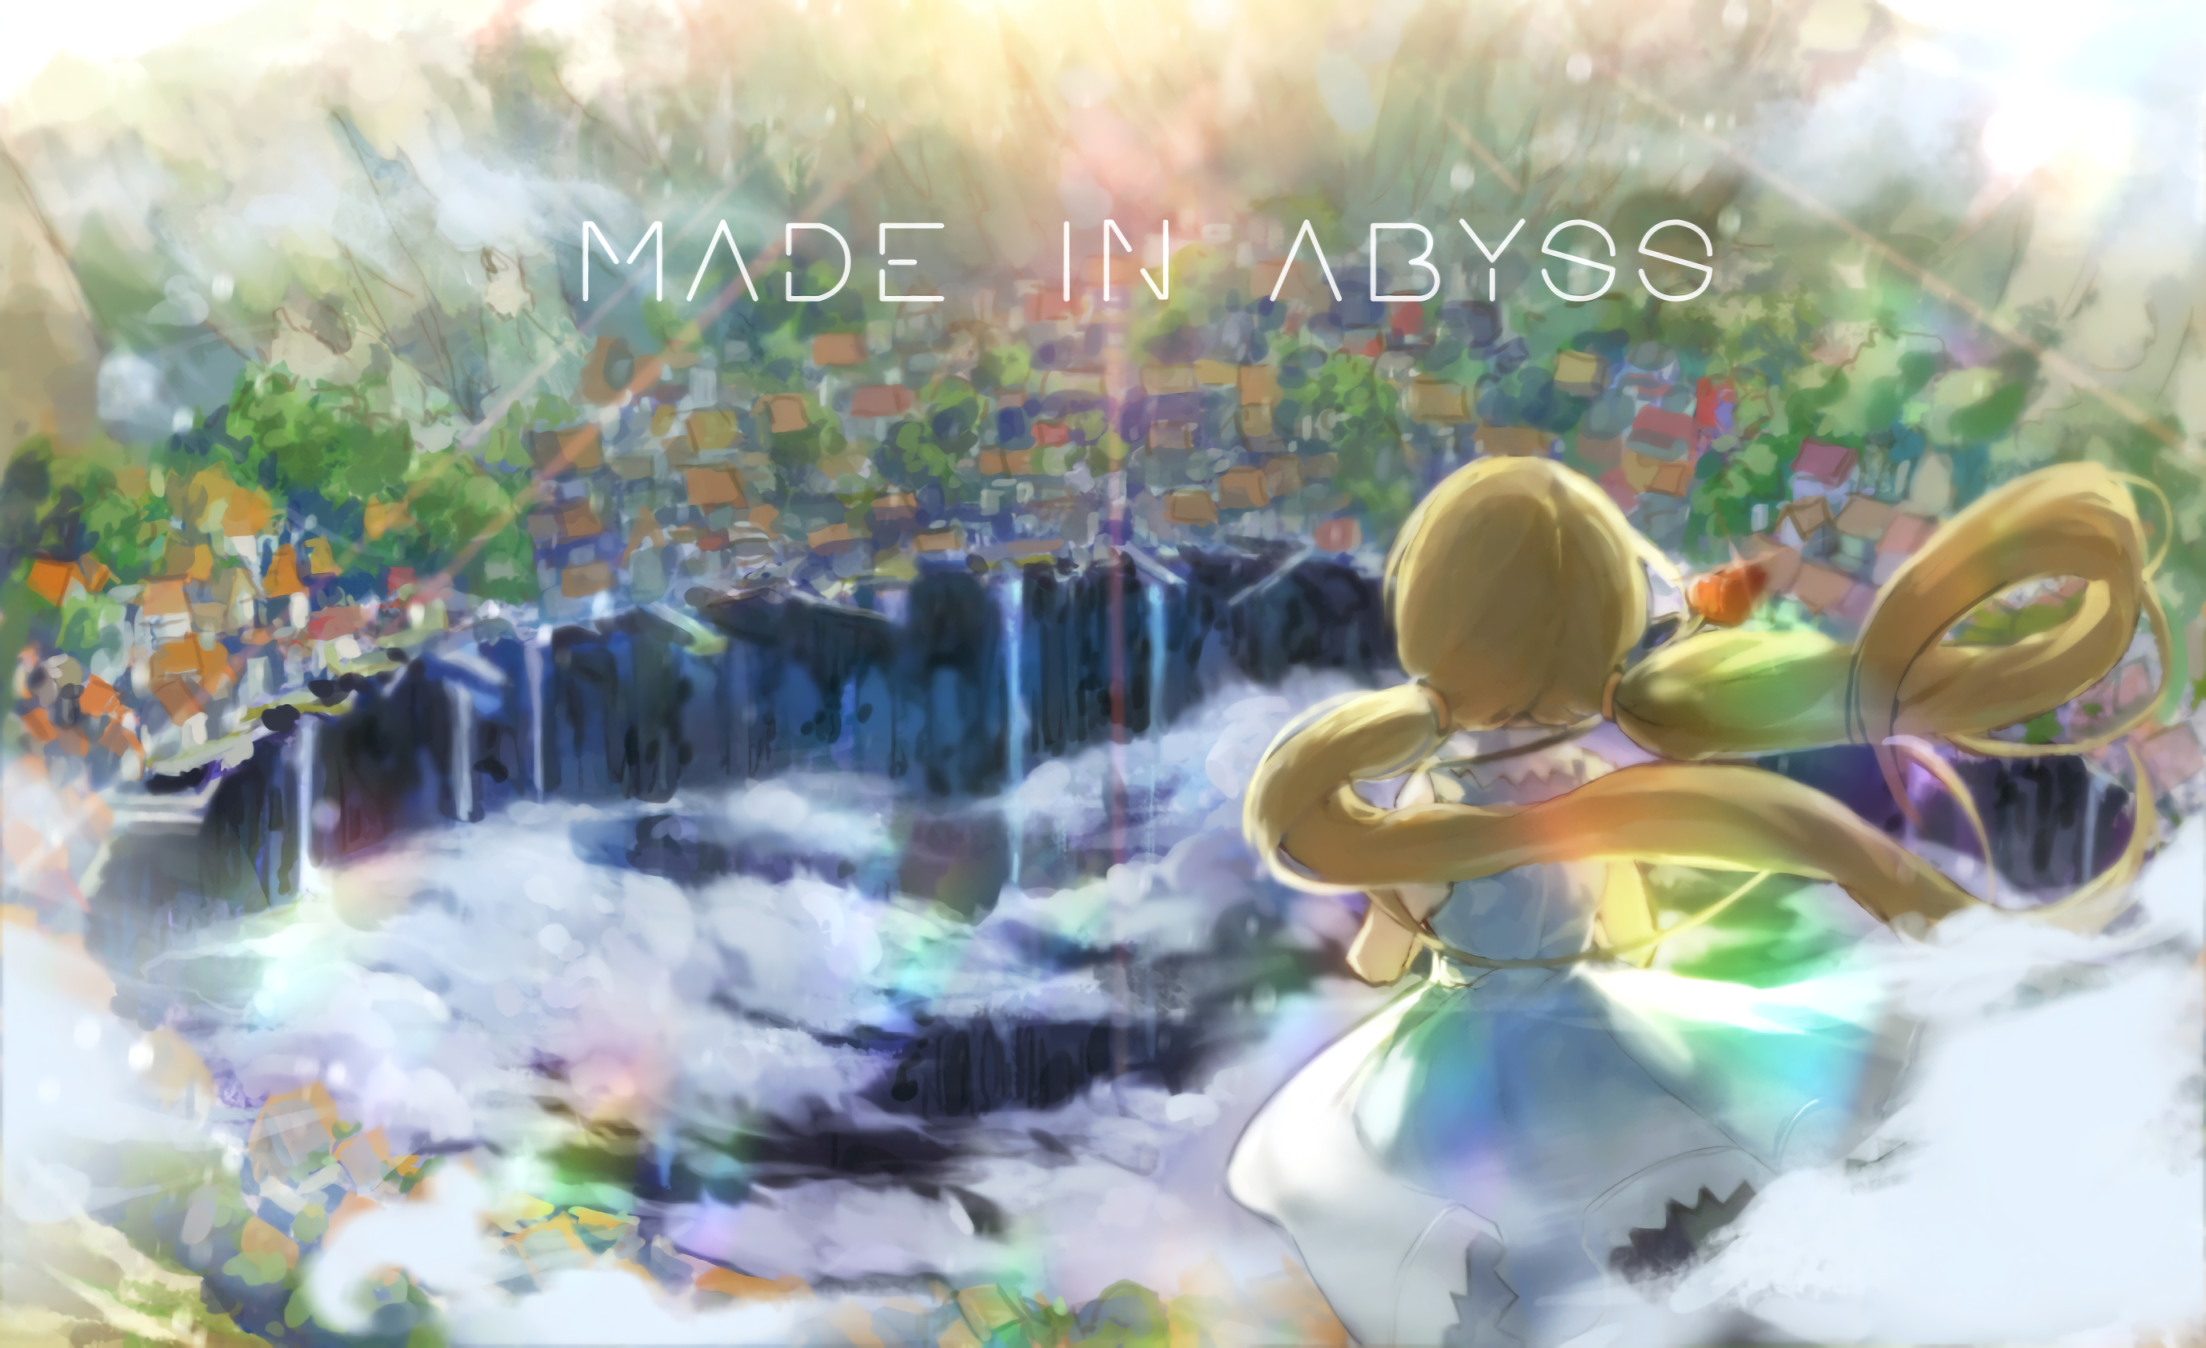 Made In Abyss Riko Made In Abyss Anime Girls 2206x1348